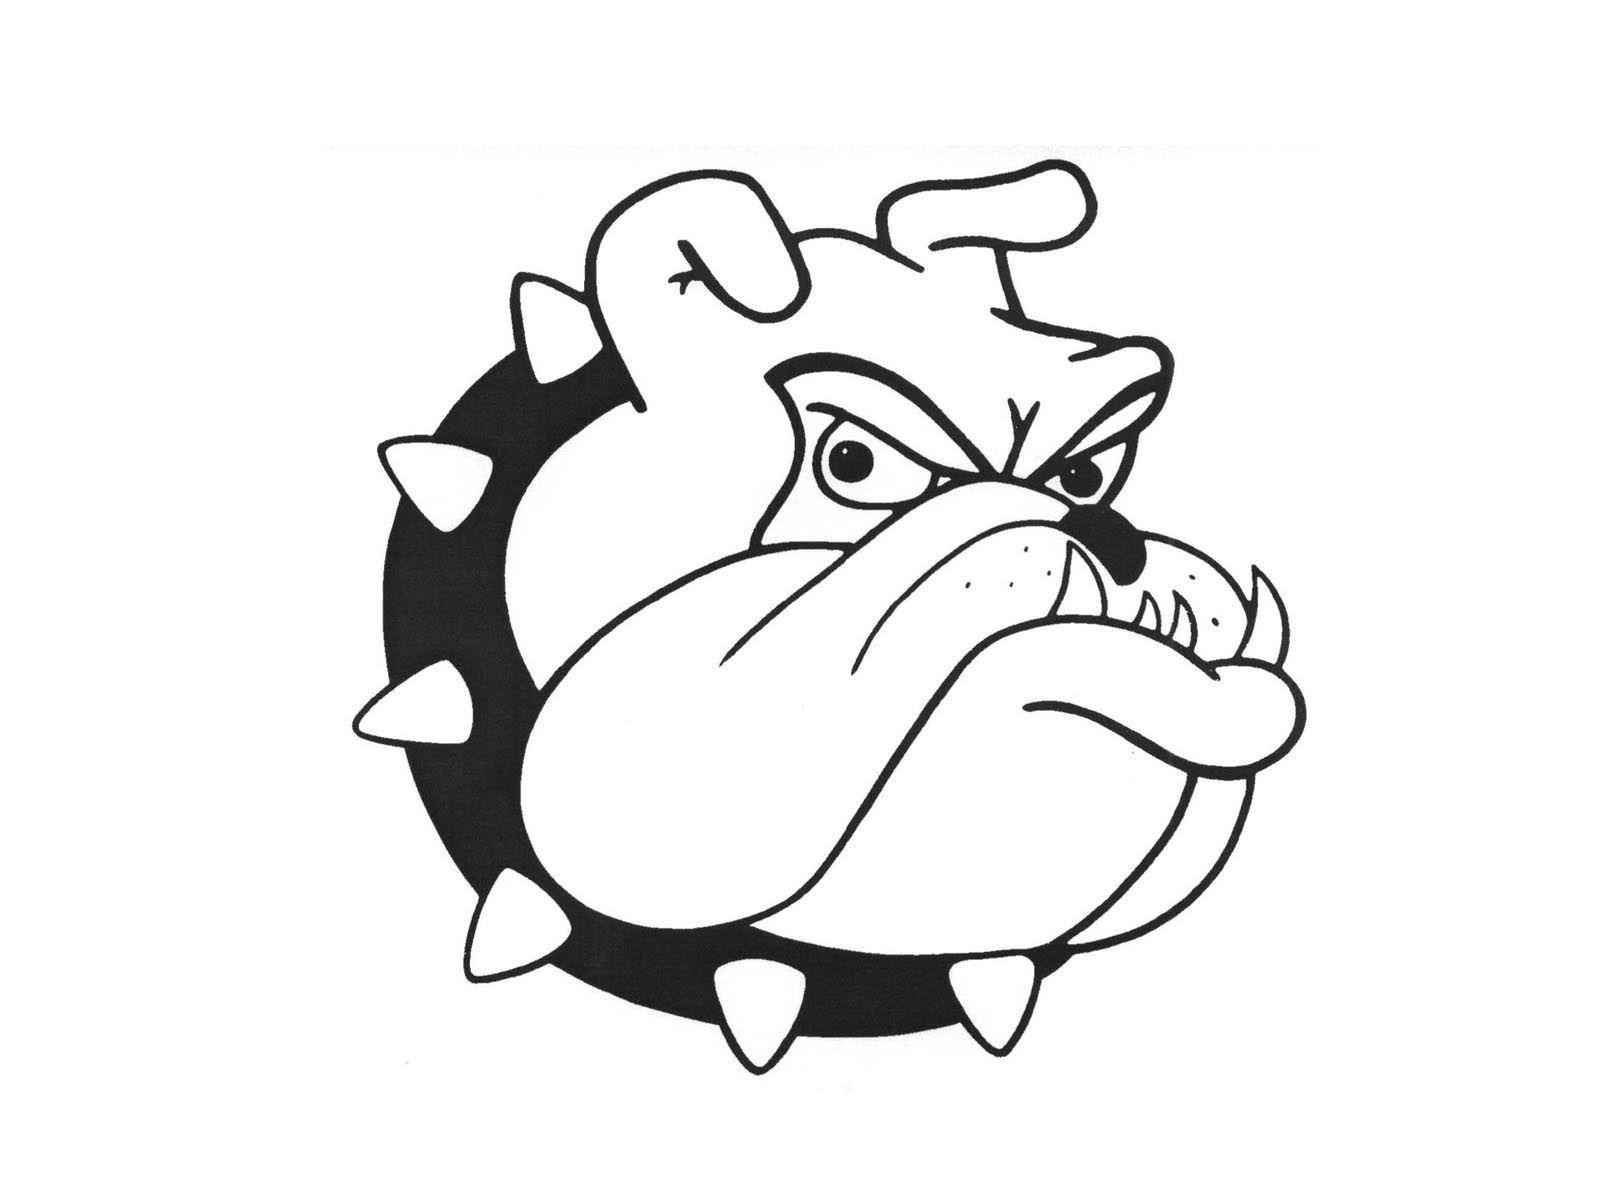 Cartoon Black and White Logo - Cartoon Bulldog Image Free Clipart That You Can Download To You